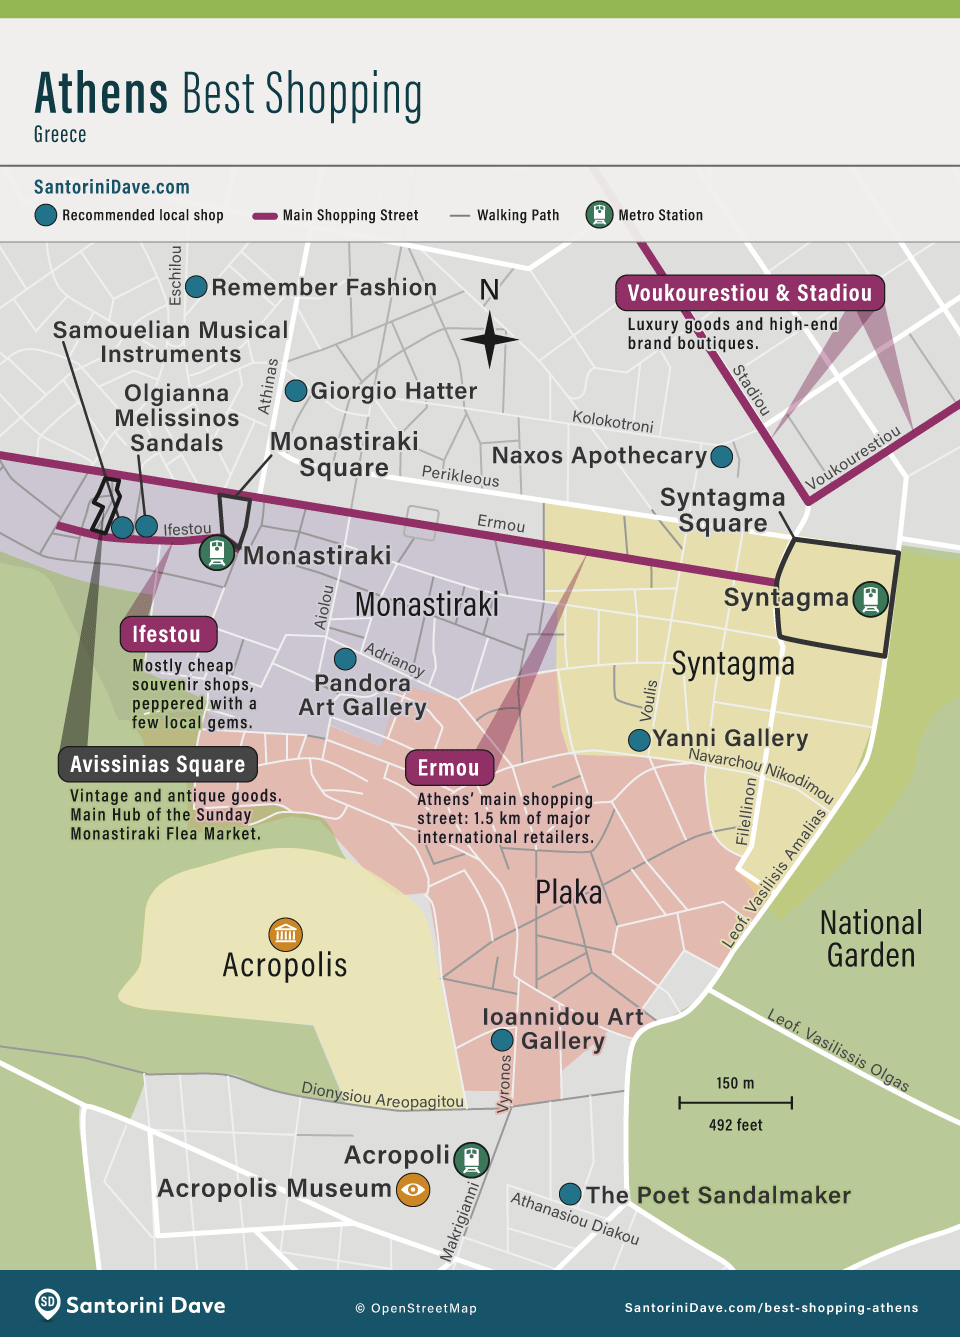 Map showing the locations of the best shopping areas and local shops in Athens, Greece.